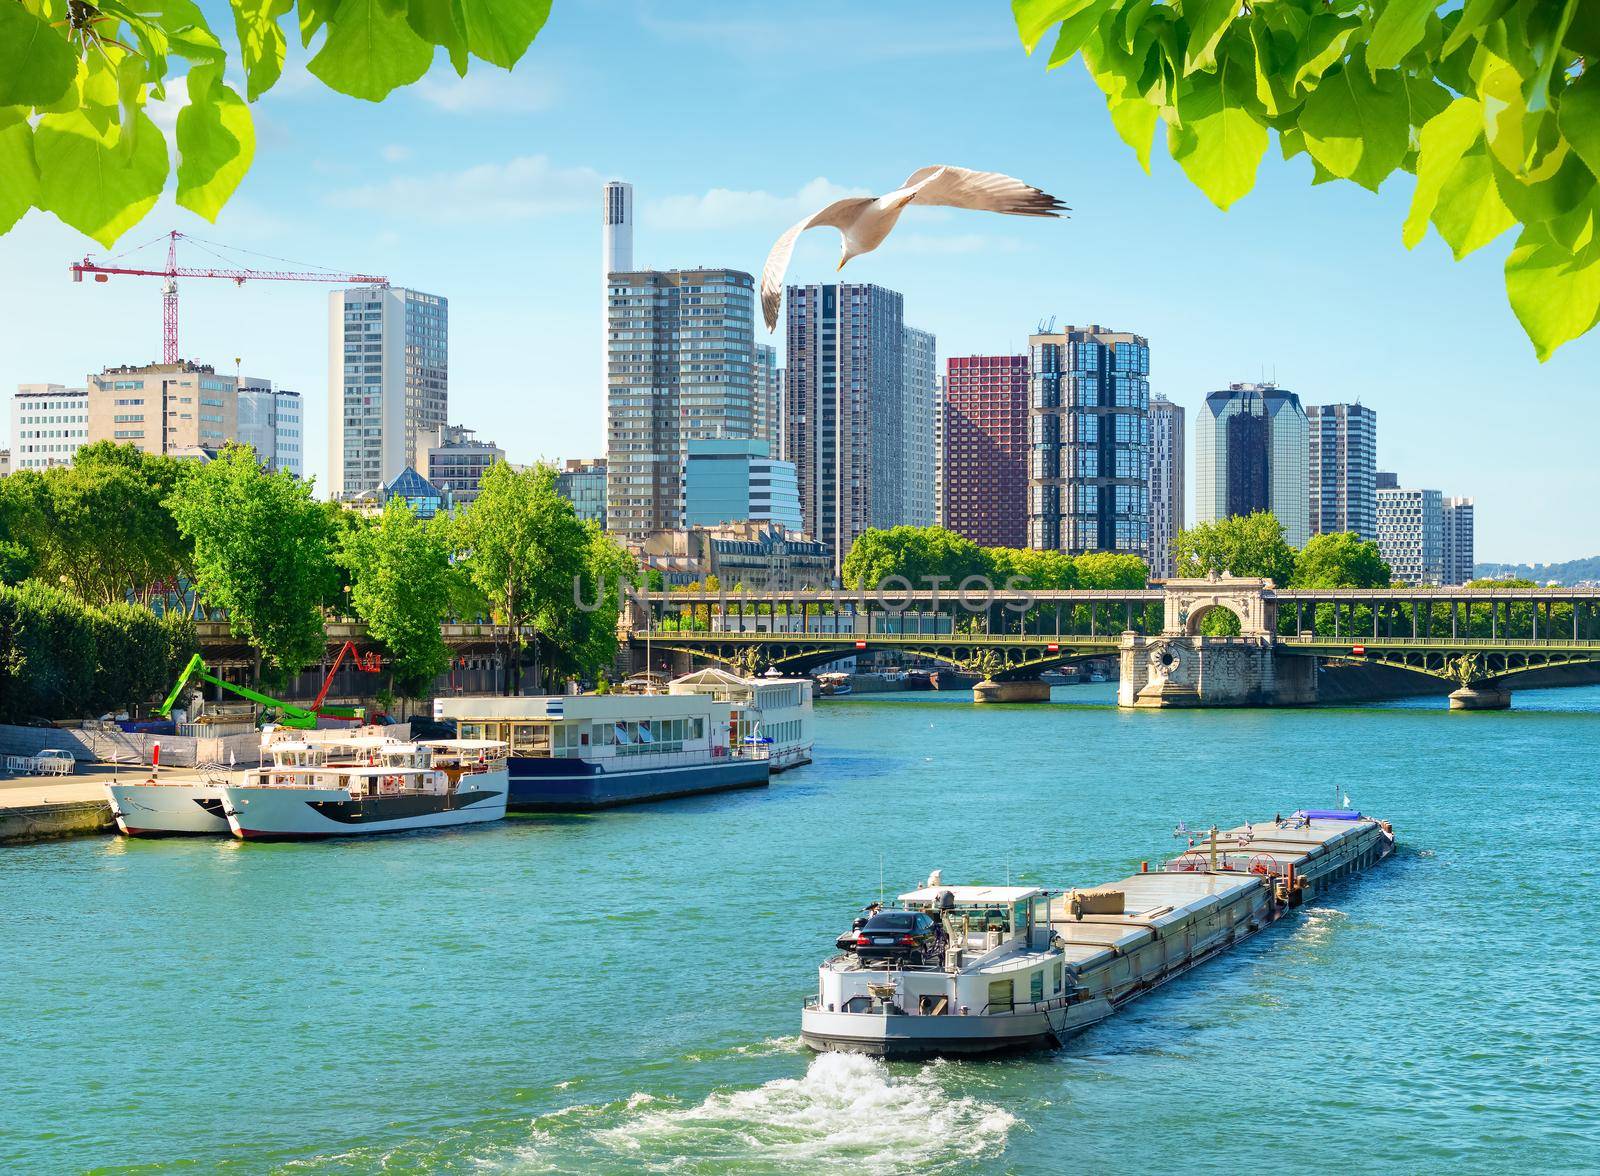 Seine river in Paris at sunny summer day